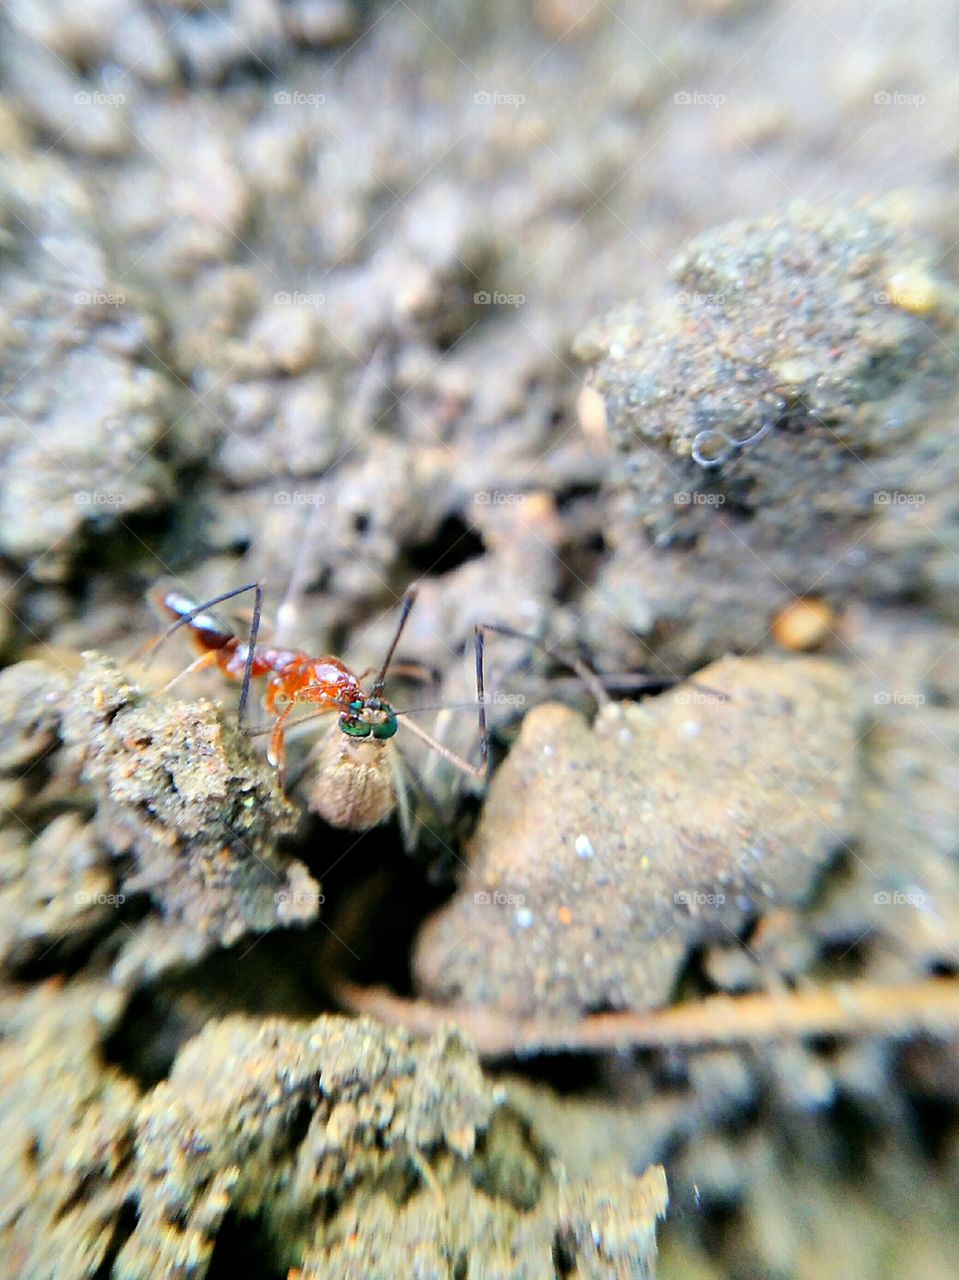 Ant hunting its prey